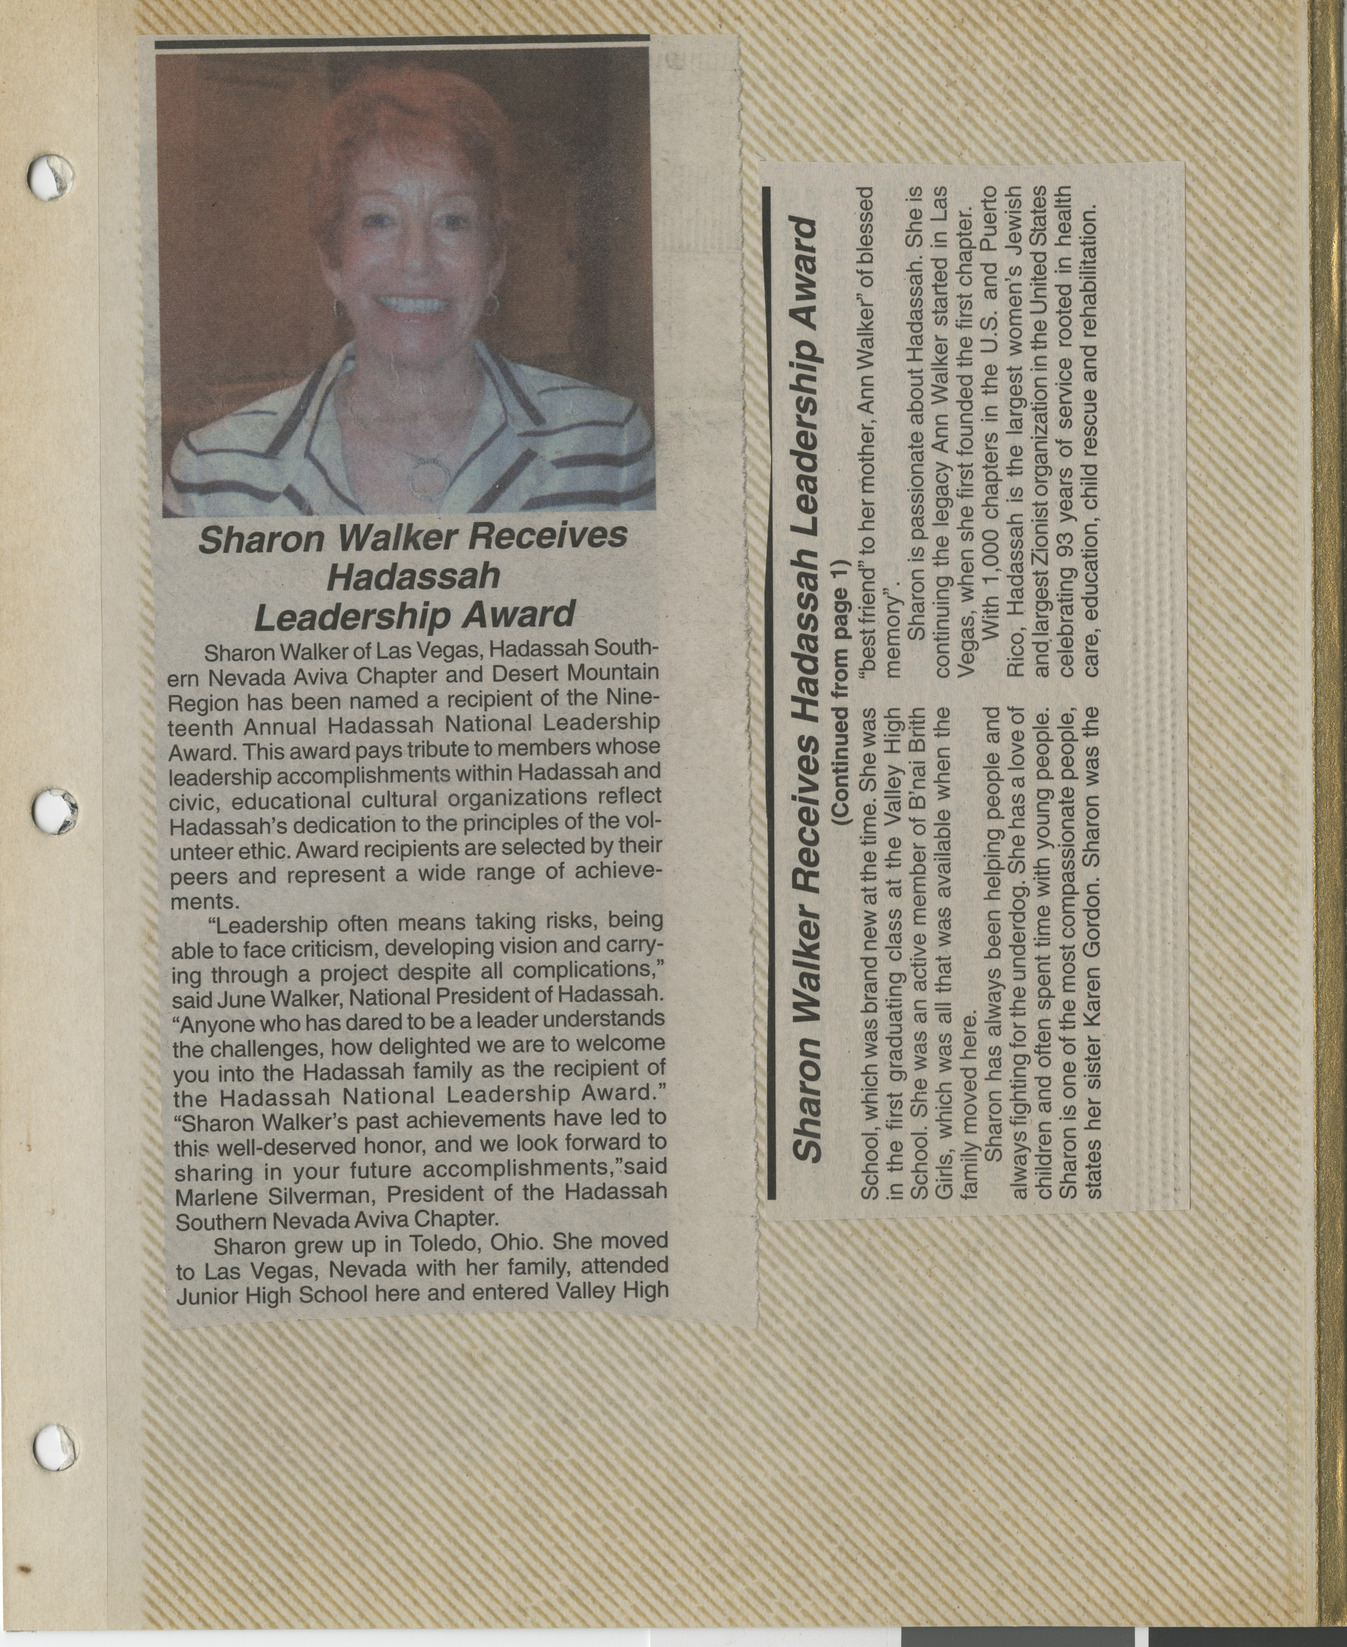 Newspaper clipping, Sharon Walker receives Hadassah leadership award, publication and date unknown